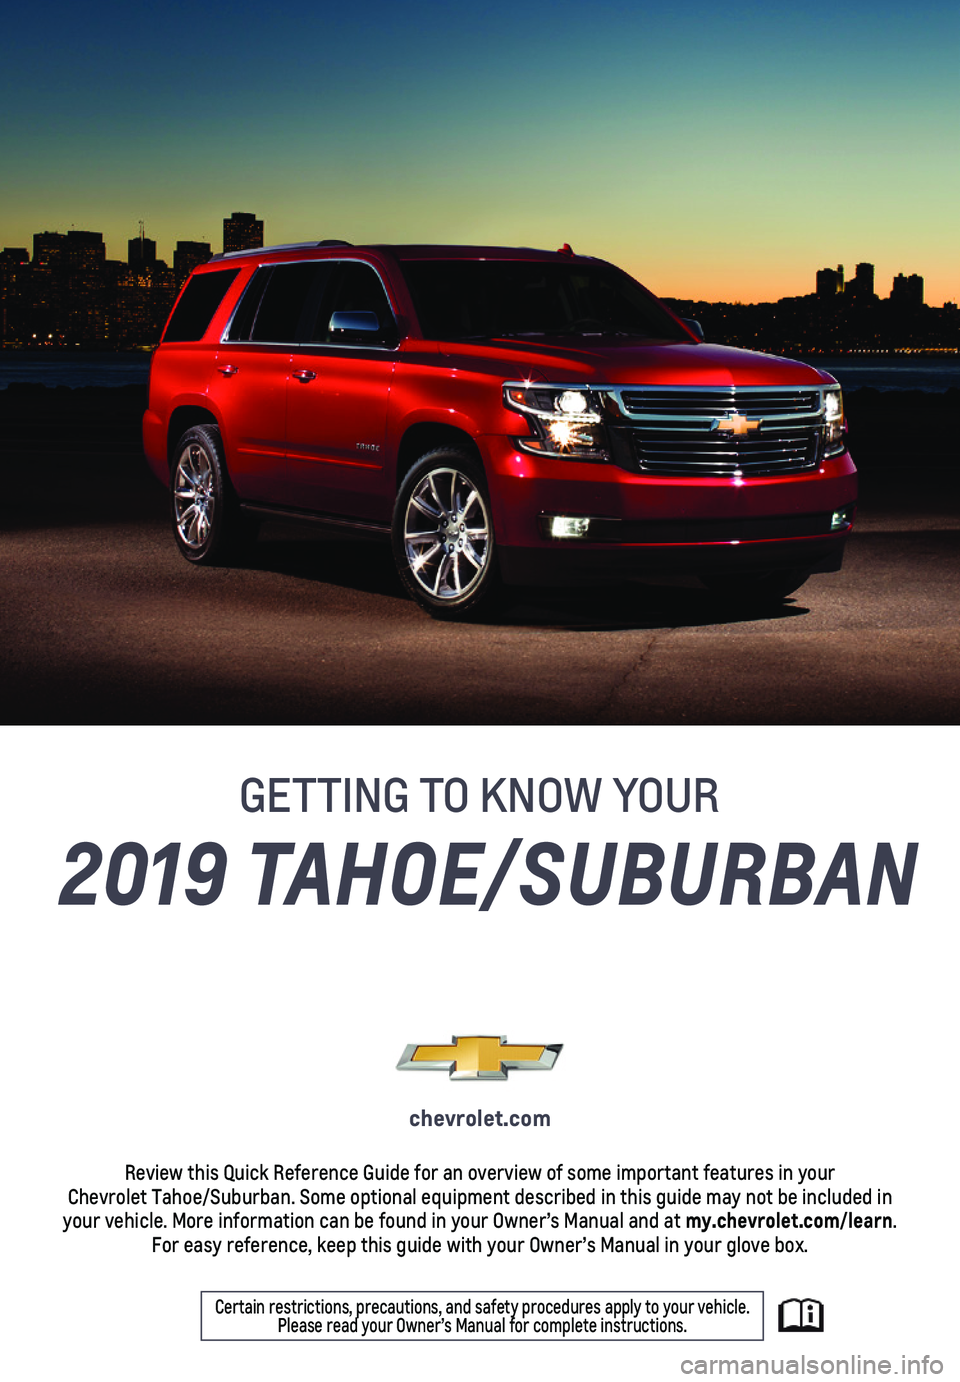 CHEVROLET TAHOE 2019  Get To Know Guide 1
2019 TAHOE/SUBURBAN
chevrolet.com
Review this Quick Reference Guide for an overview of some important feat\
ures in your  Chevrolet Tahoe/Suburban. Some optional equipment described in this guid\
e 